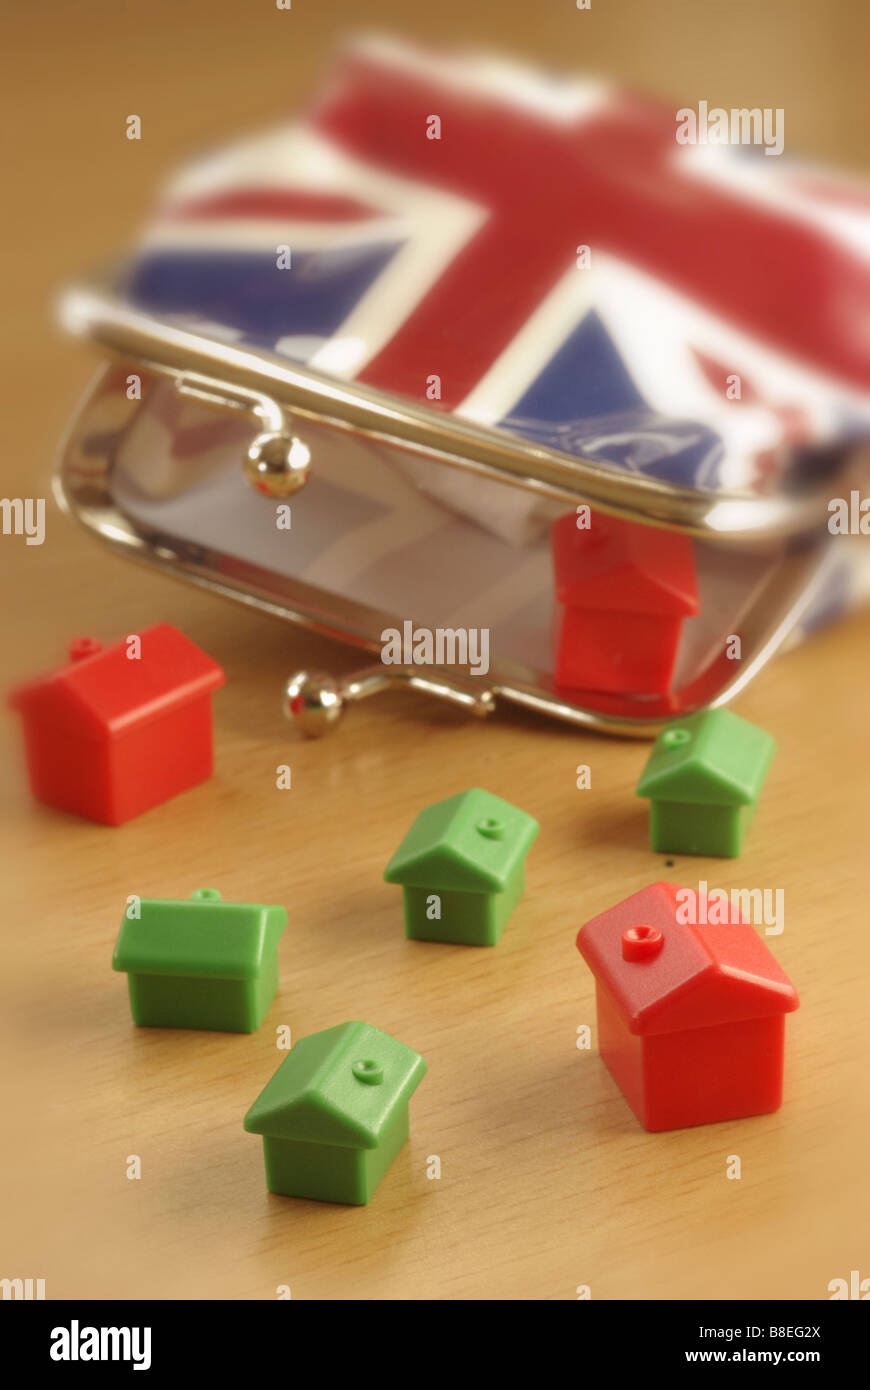 British Purse with homes spilling out (Mortgage) Stock Photo